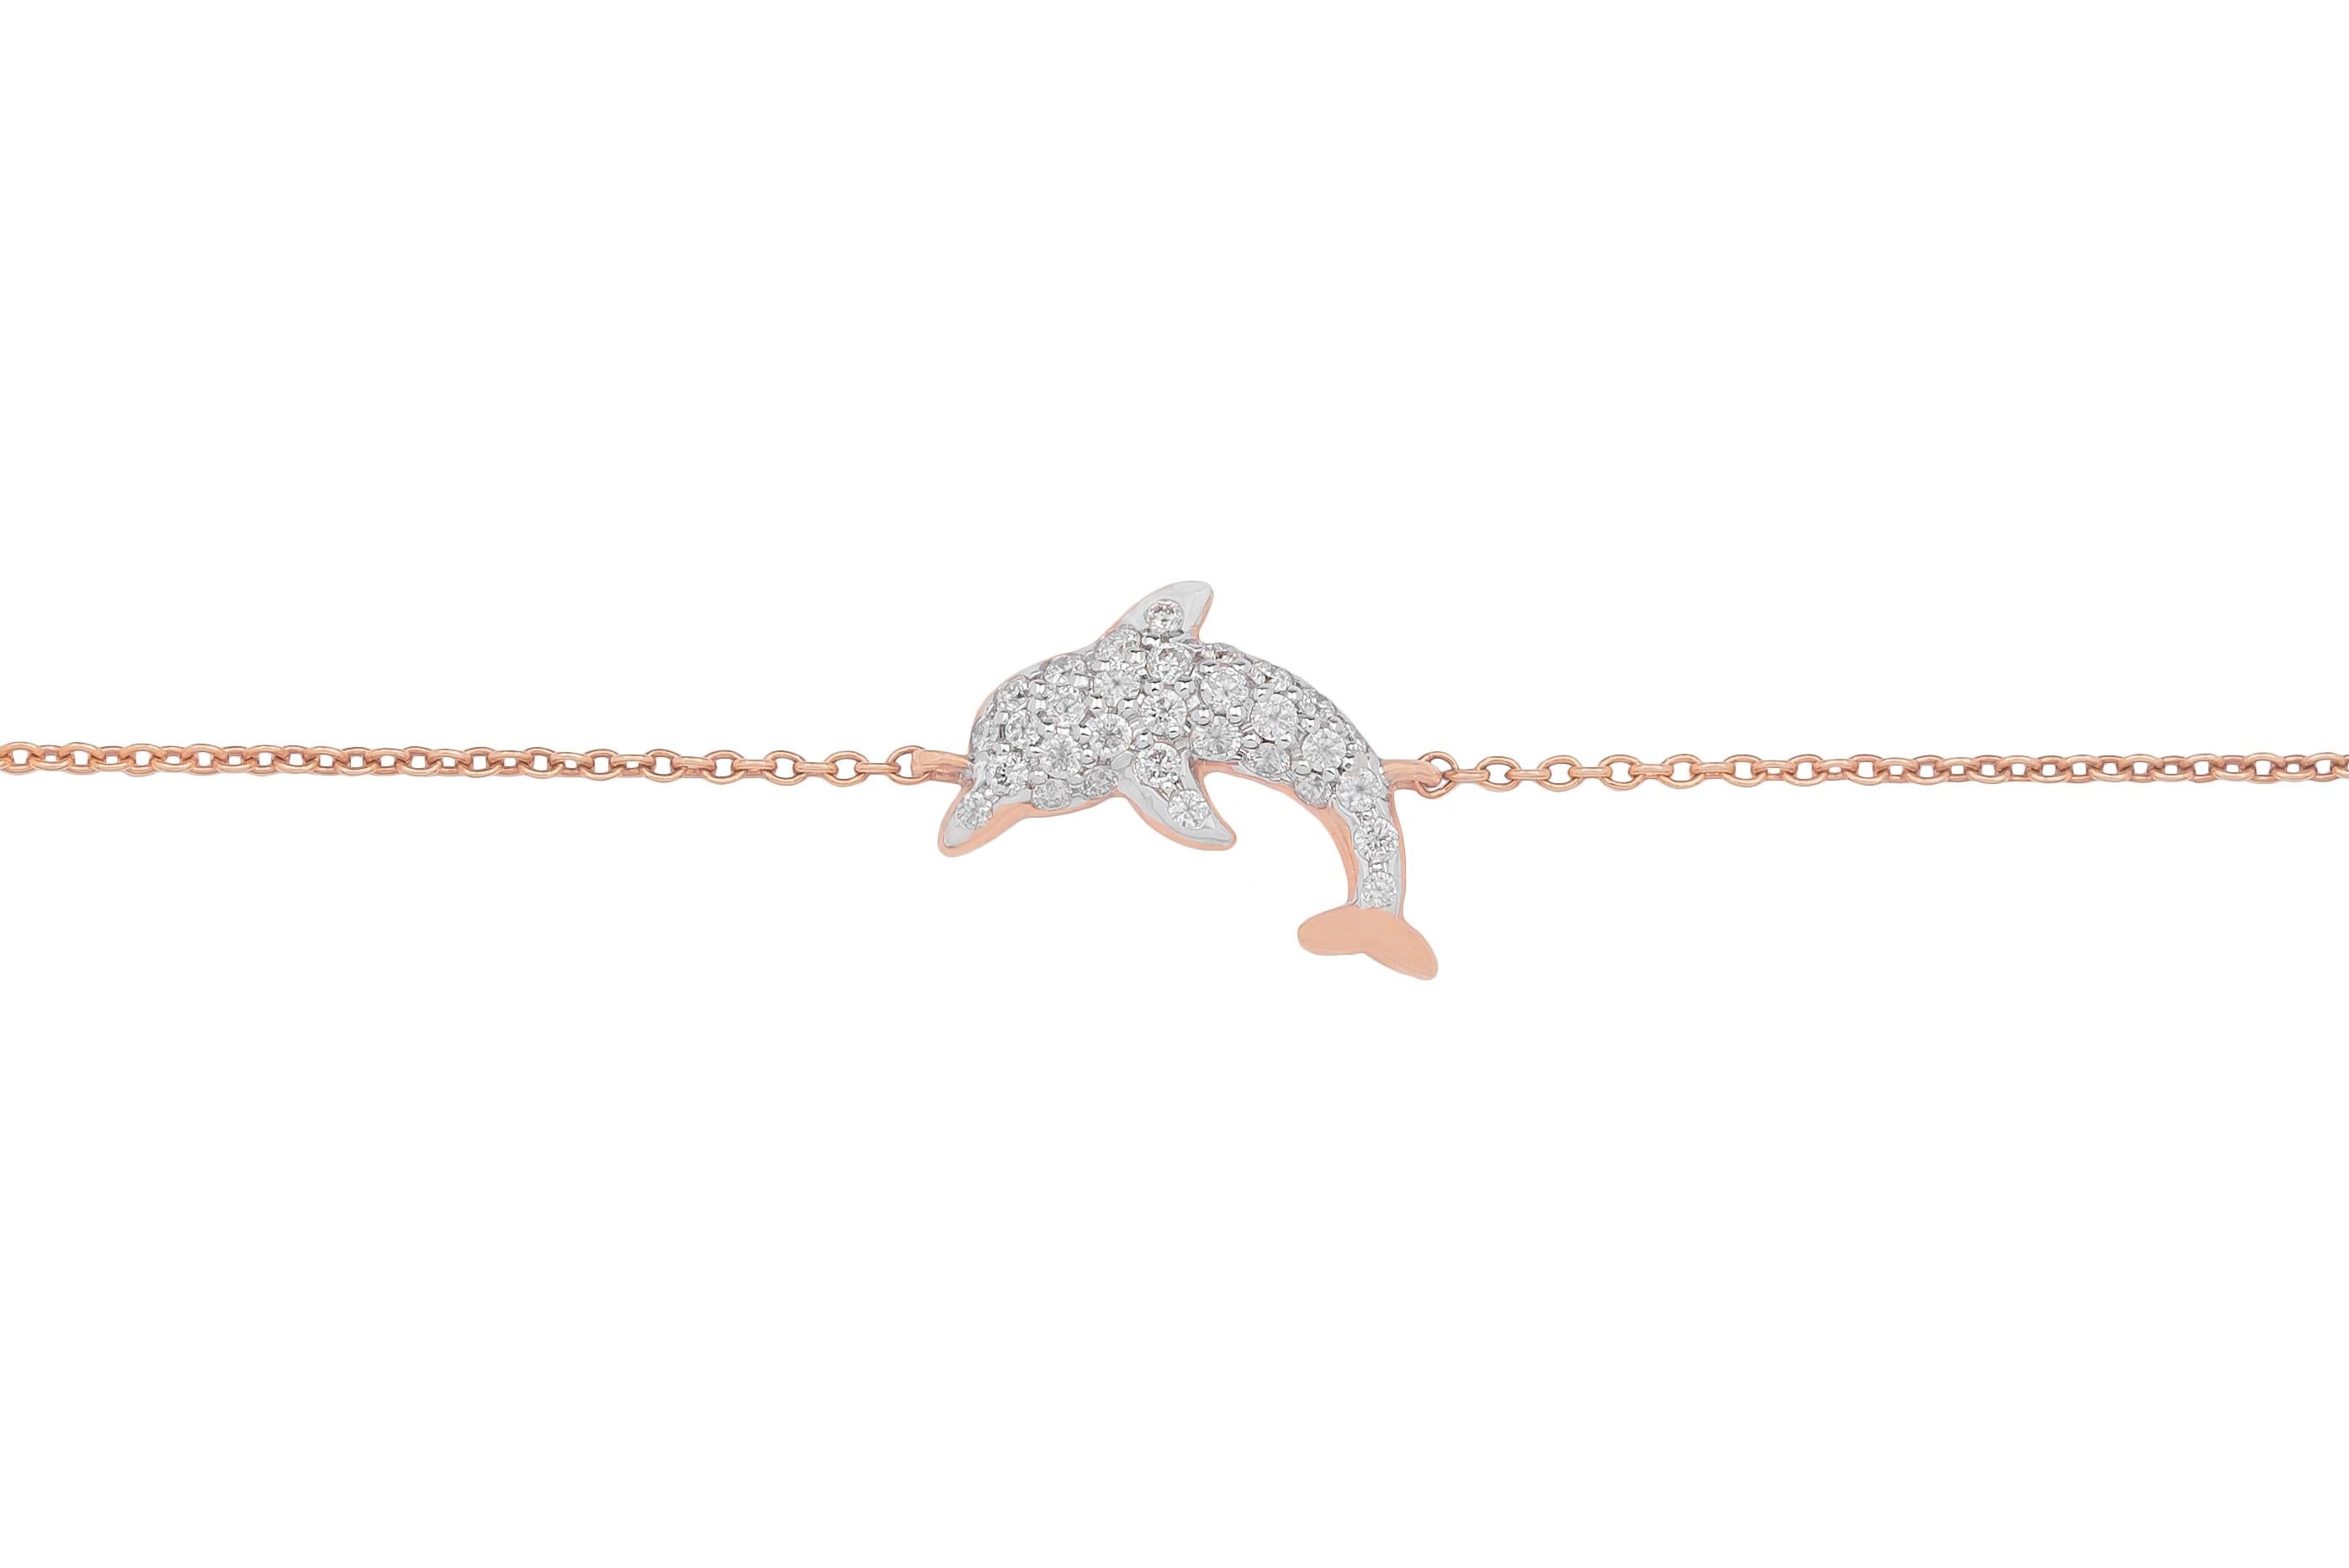 This 18k rose gold bracelet with diamonds is made in Italy by Fanuele Gioielli.    
It features a rose gold dolphin covered with white brilliant cut diamonds.
The length of the bracelet can be adjusted through two rings placed at the end of the